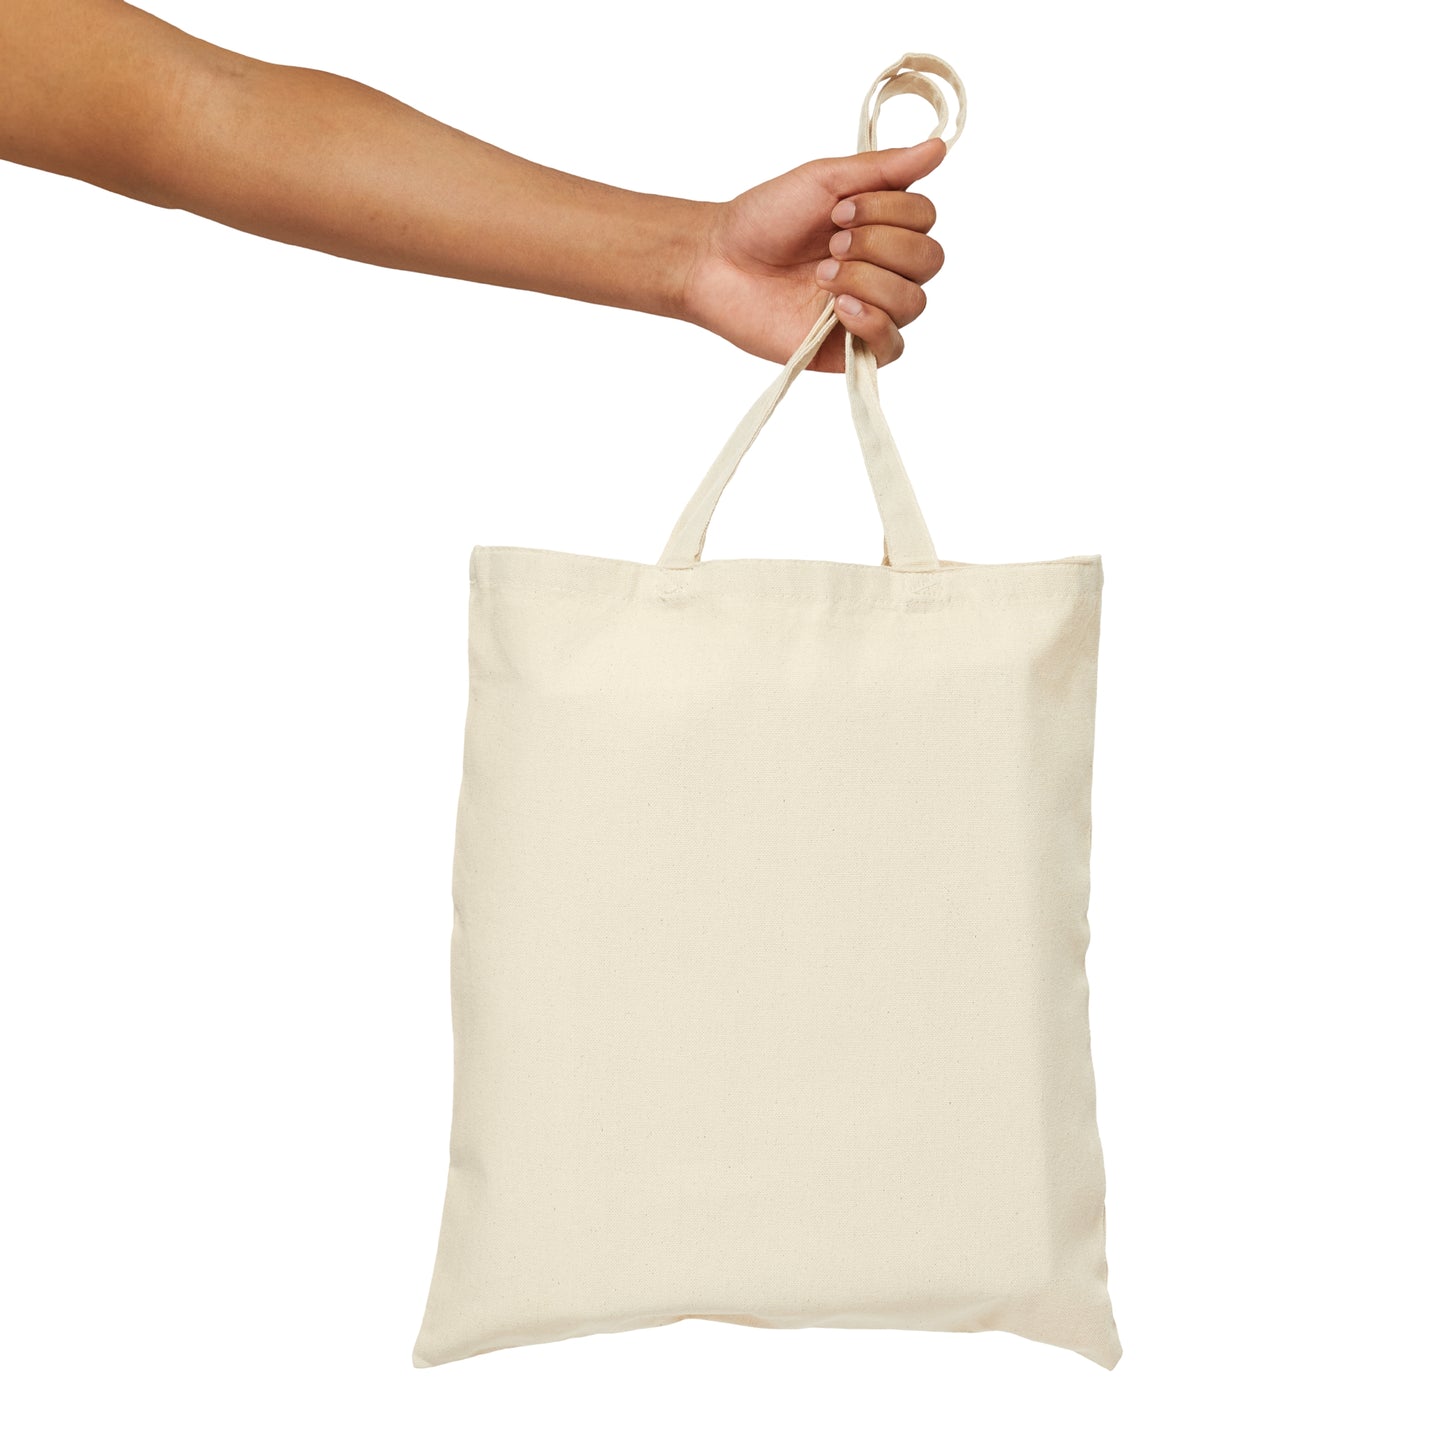 "Wholesome Vacations" Cotton Canvas Tote Bag